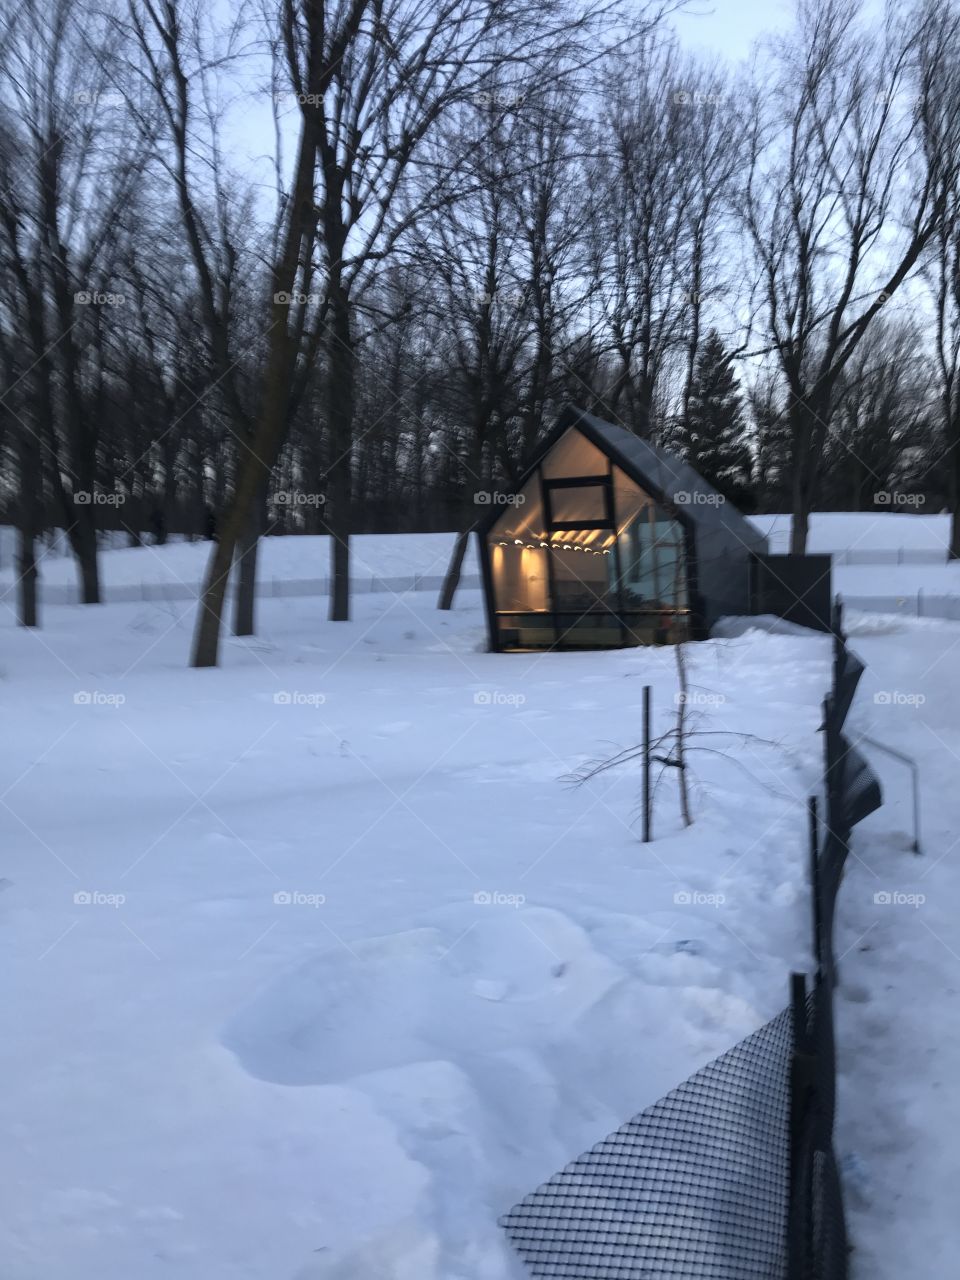 Winter evening with a cute modern tiny house